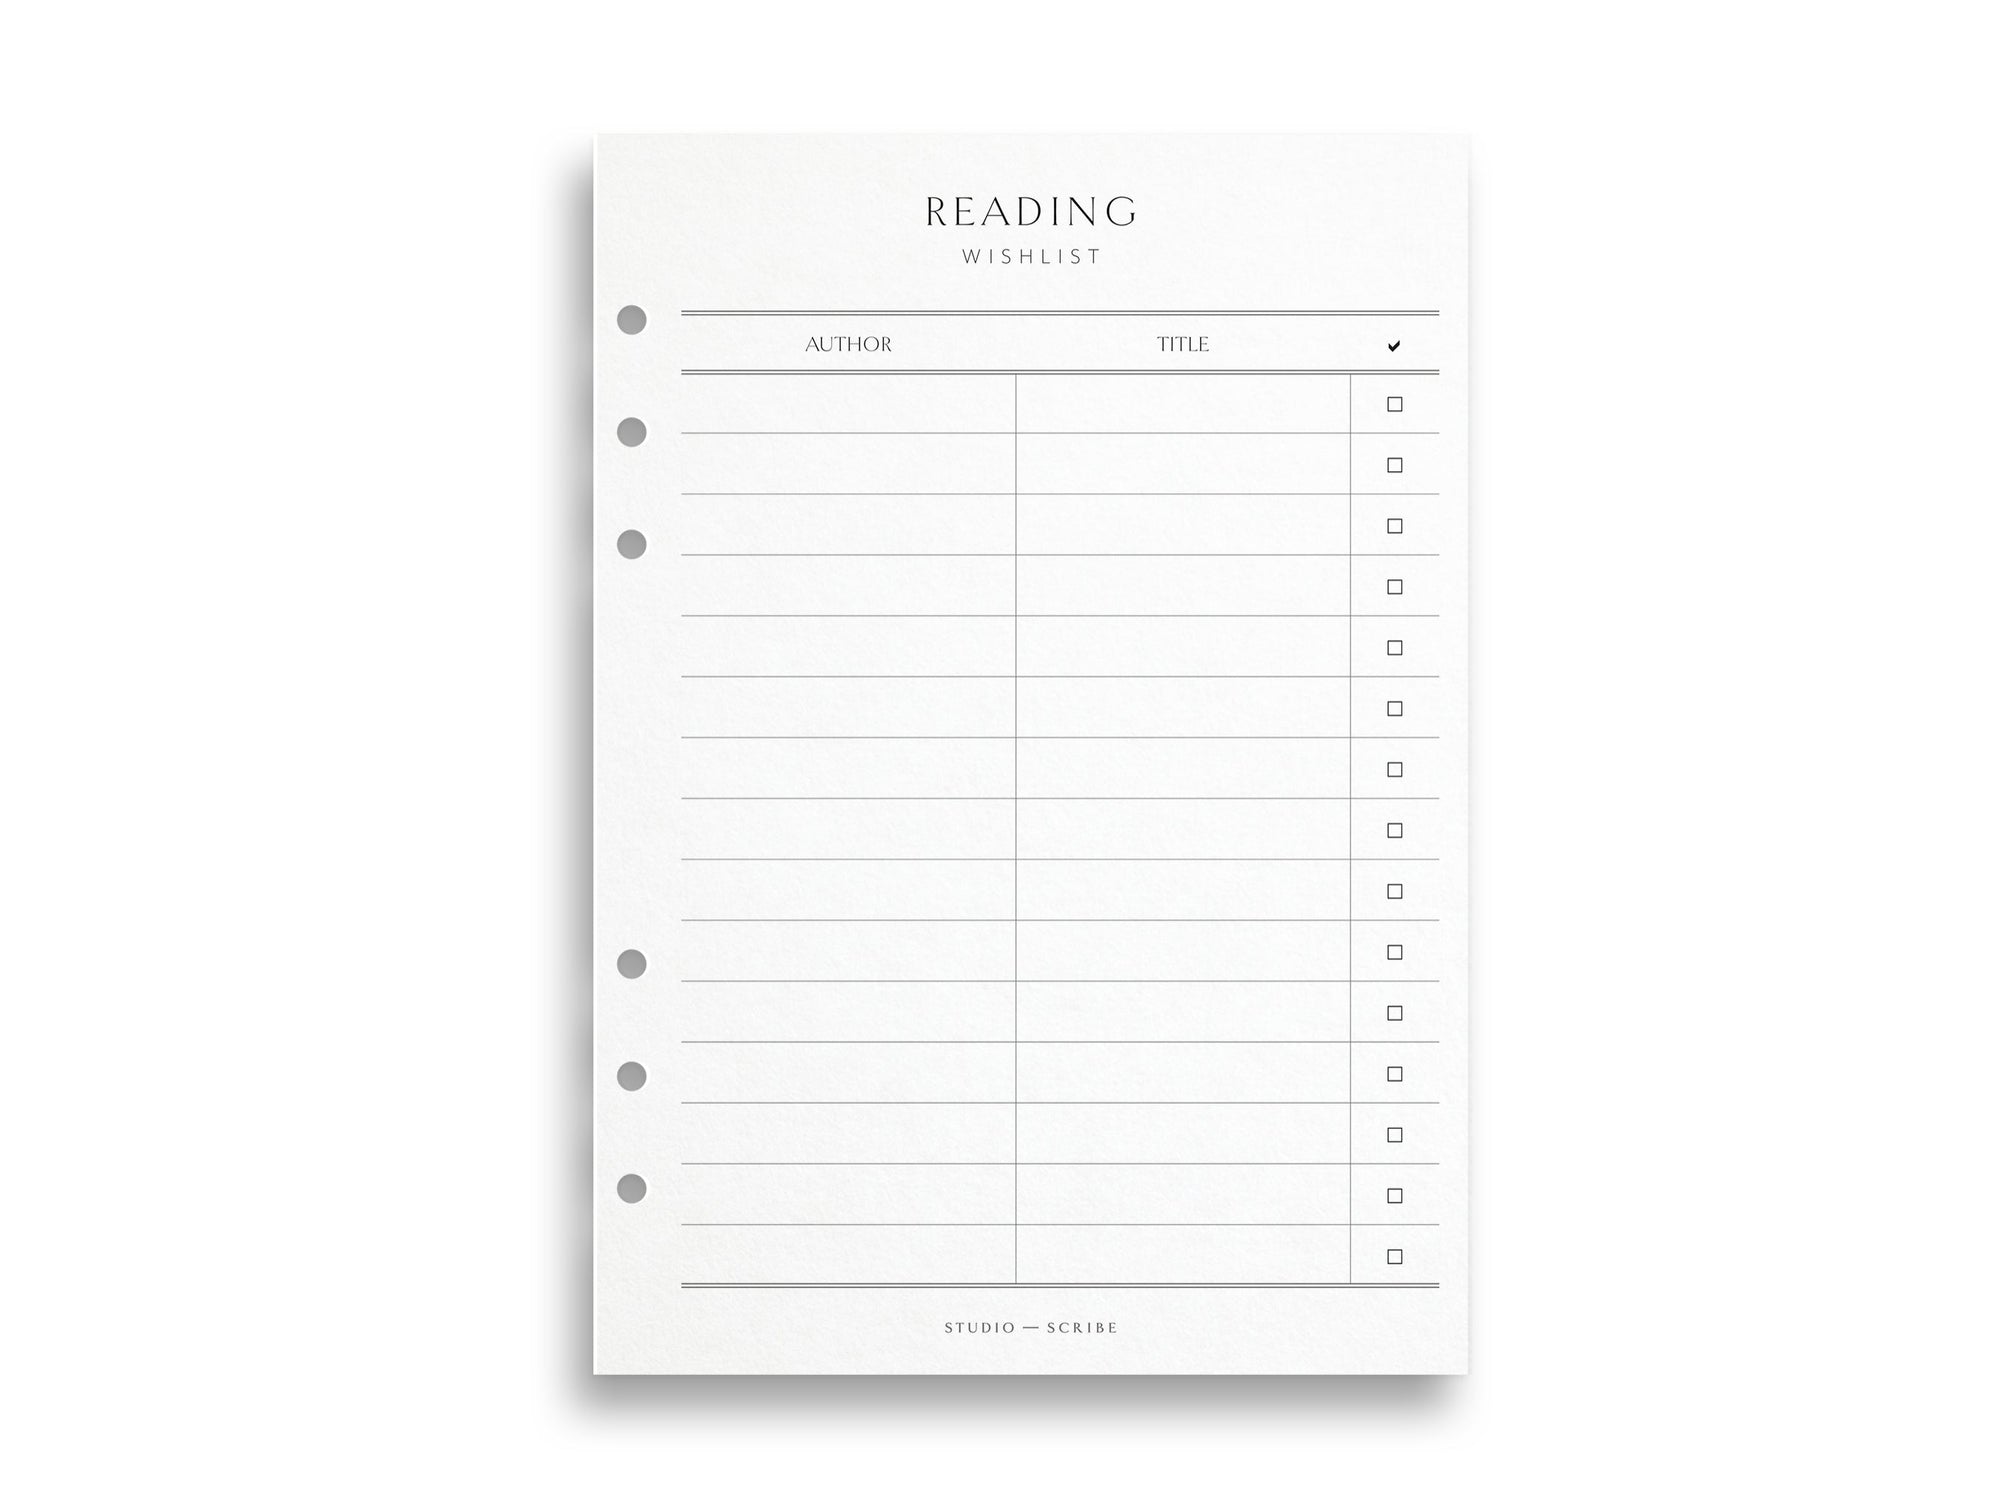 Printed Reading/Audio-Book Wishlist Pages | Planner Pages | A5